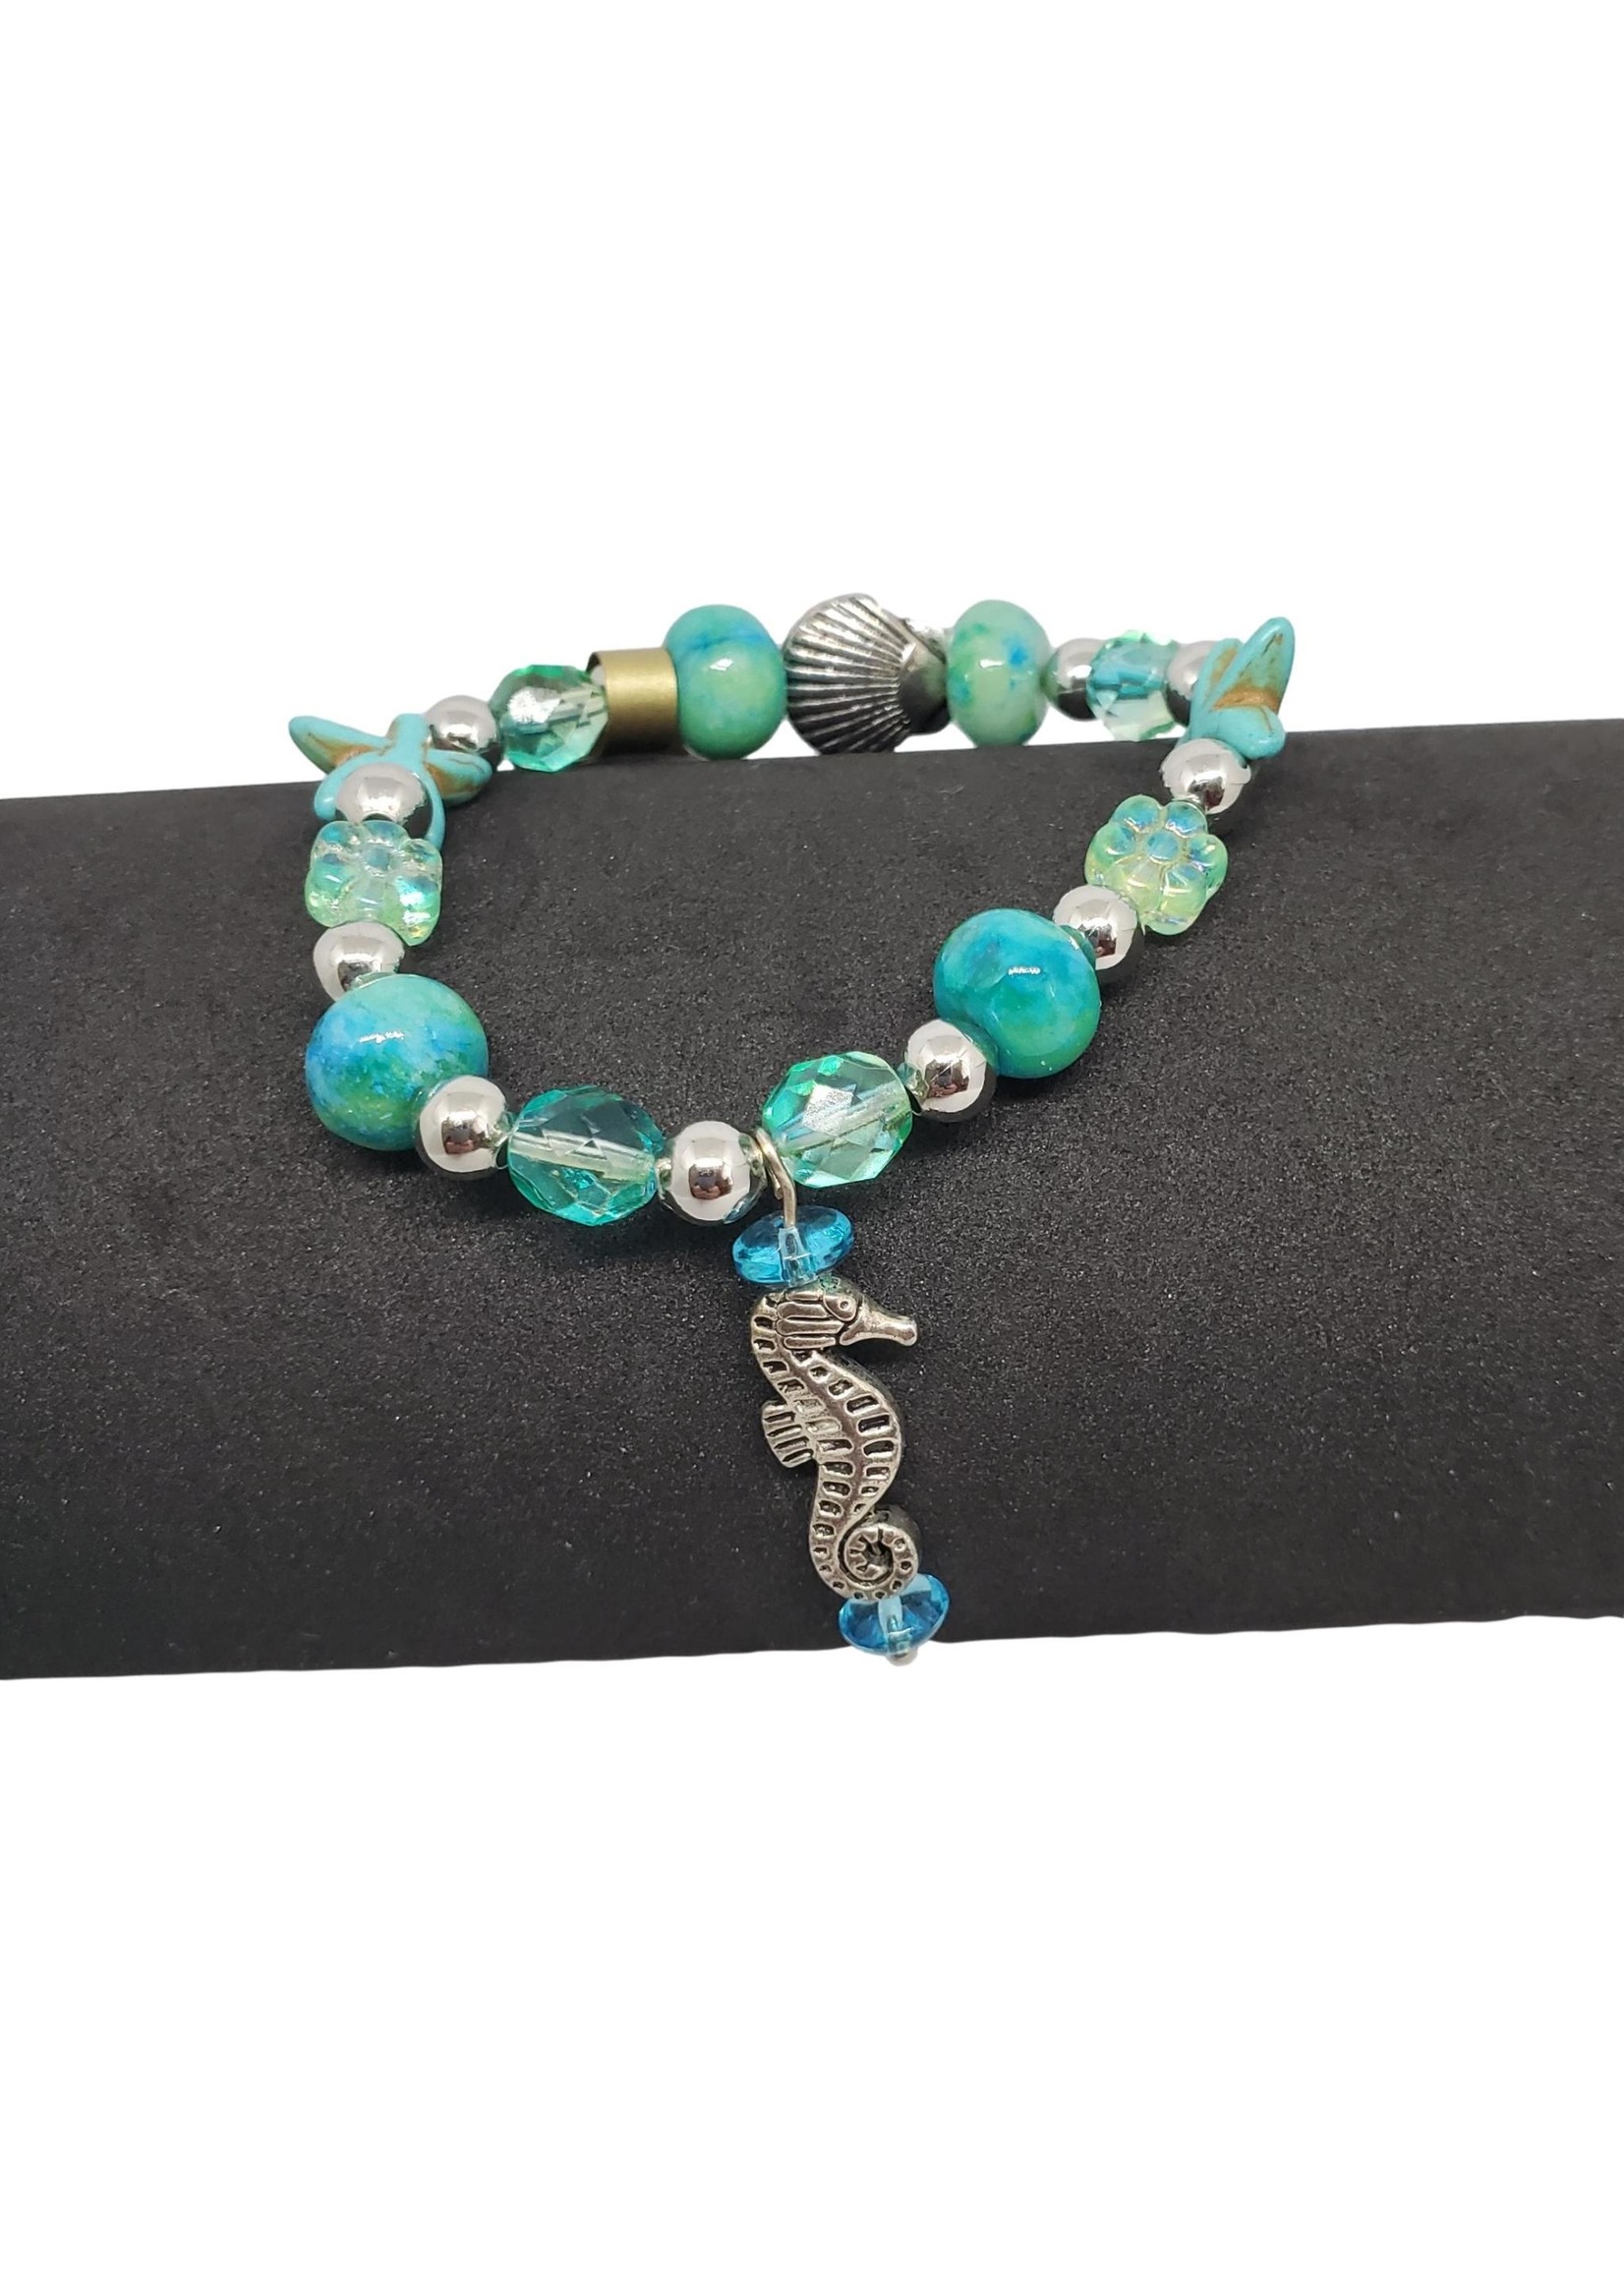 Jewellery by Deborah Young-Groves Ocean-Themed Beaded Bracelet with Seahorse